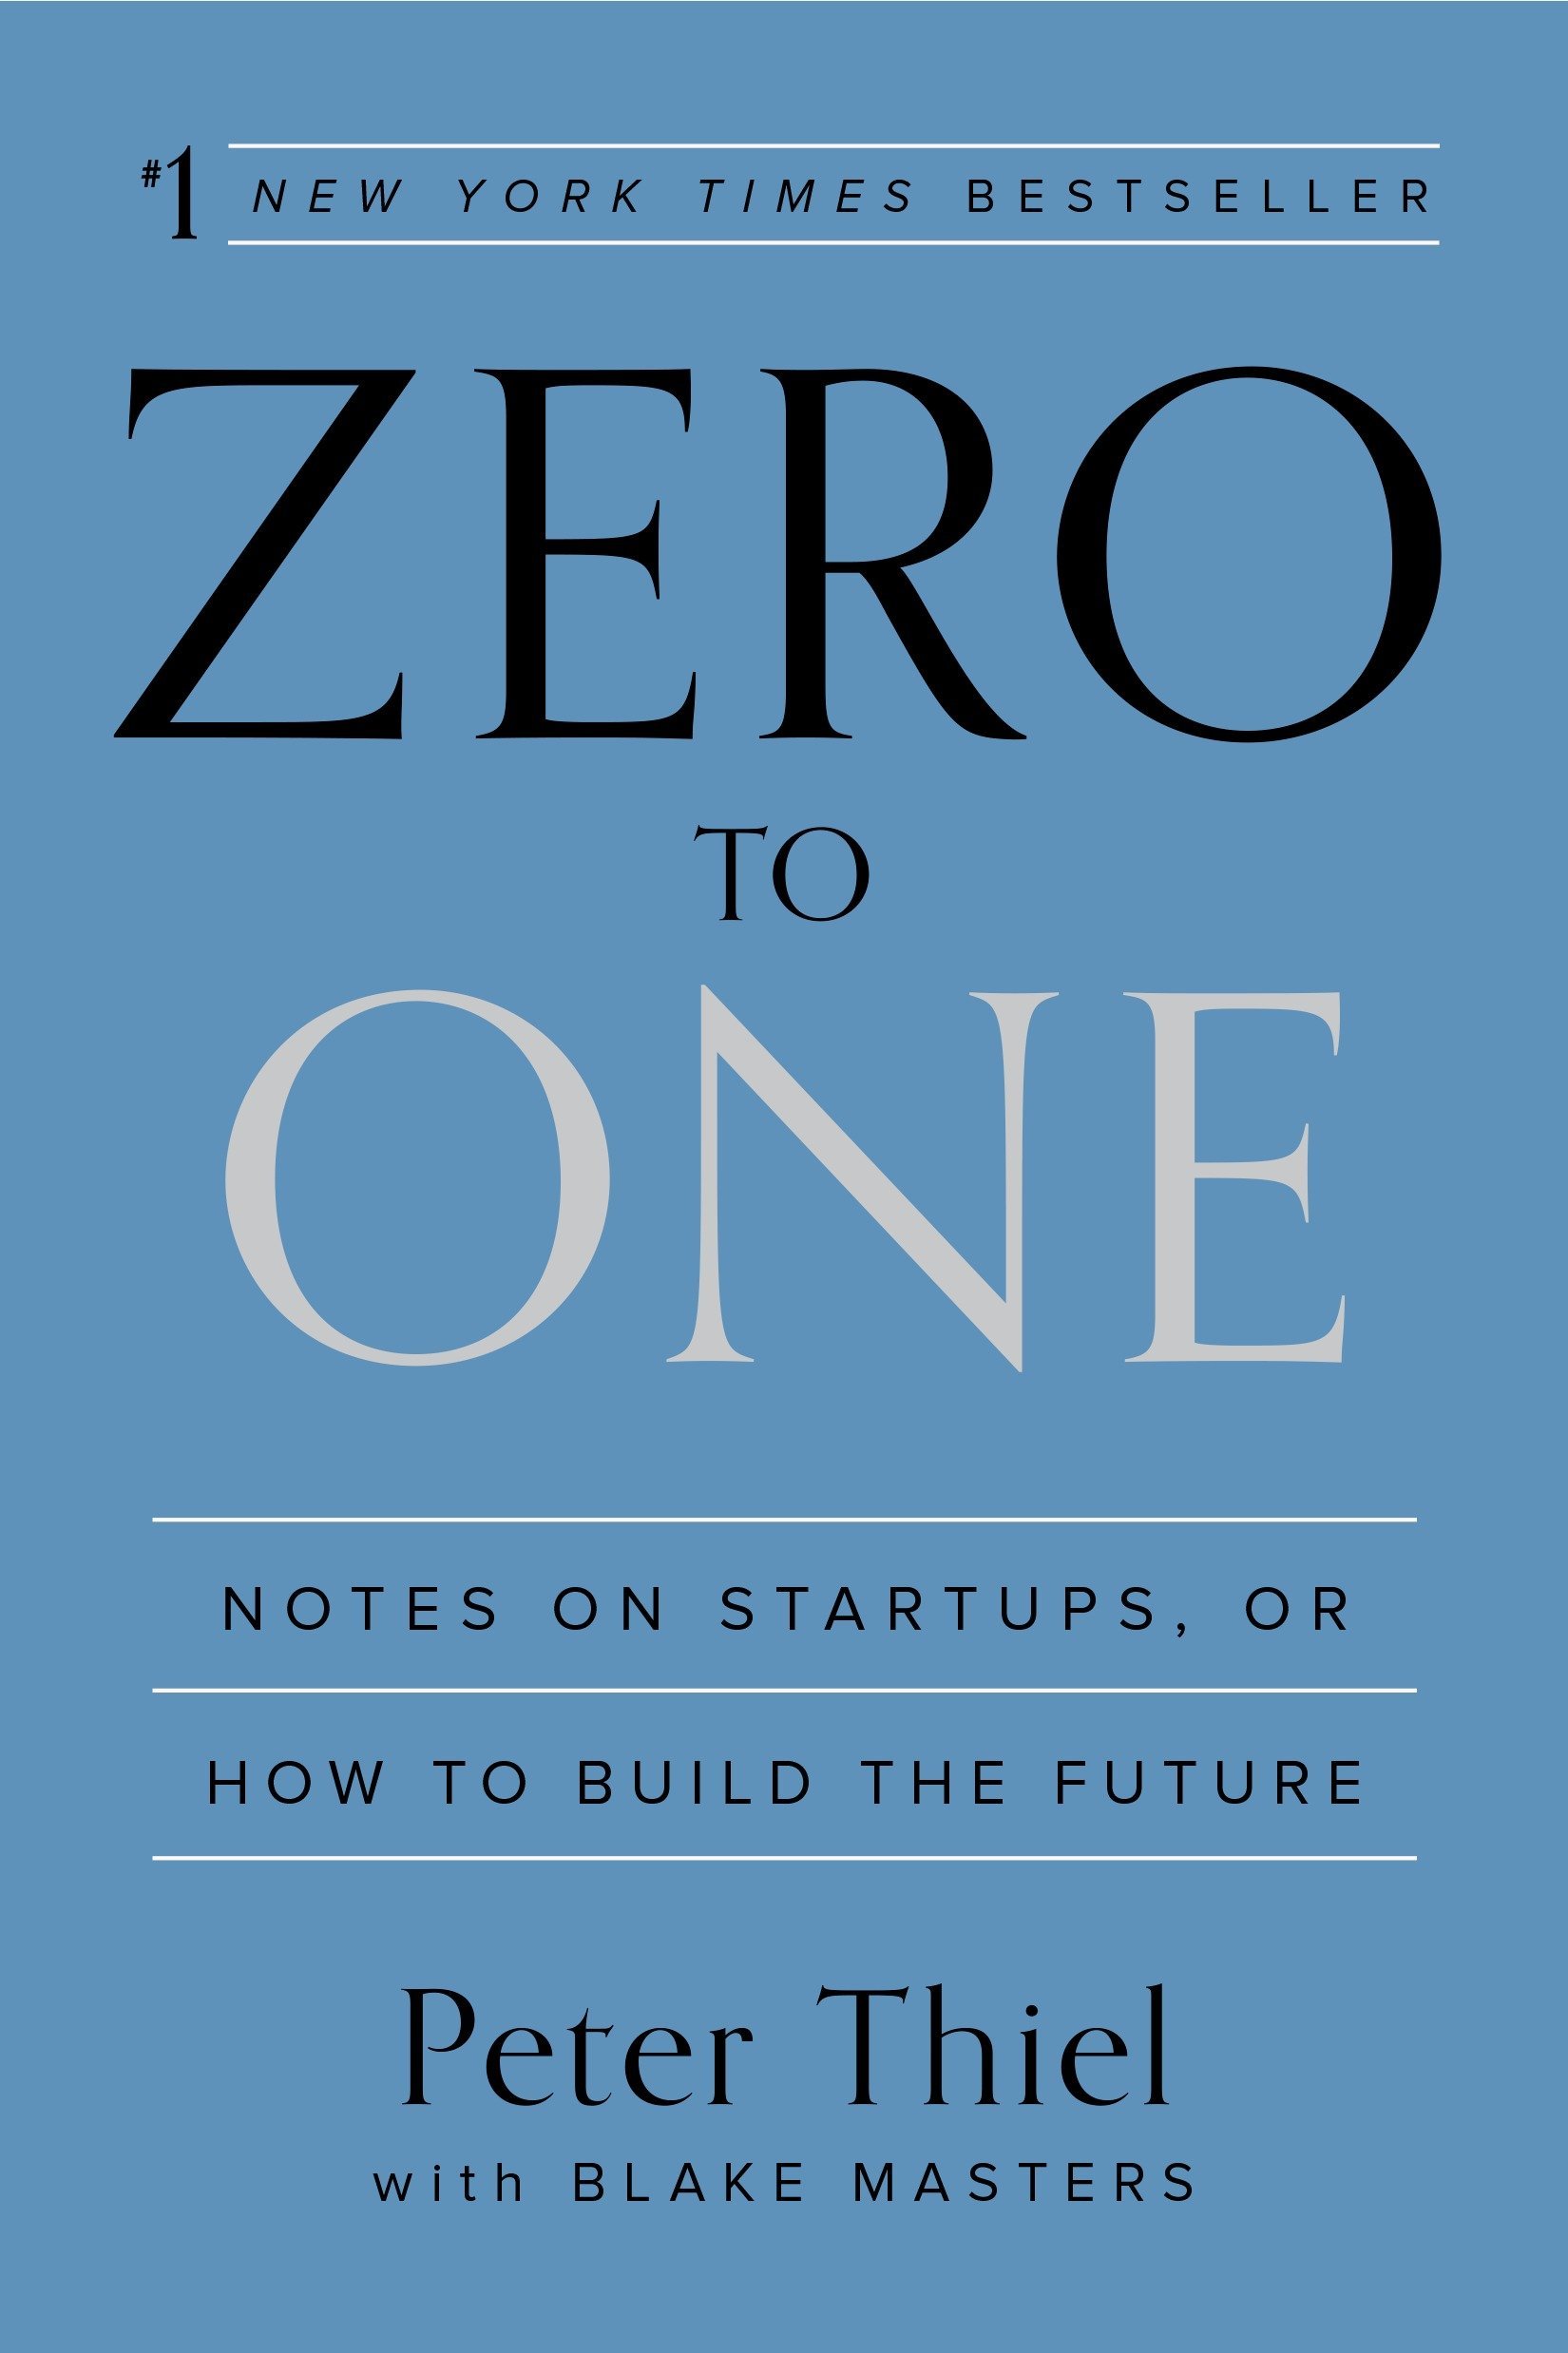 Zero To One by Peter Thiel with Blake Masters